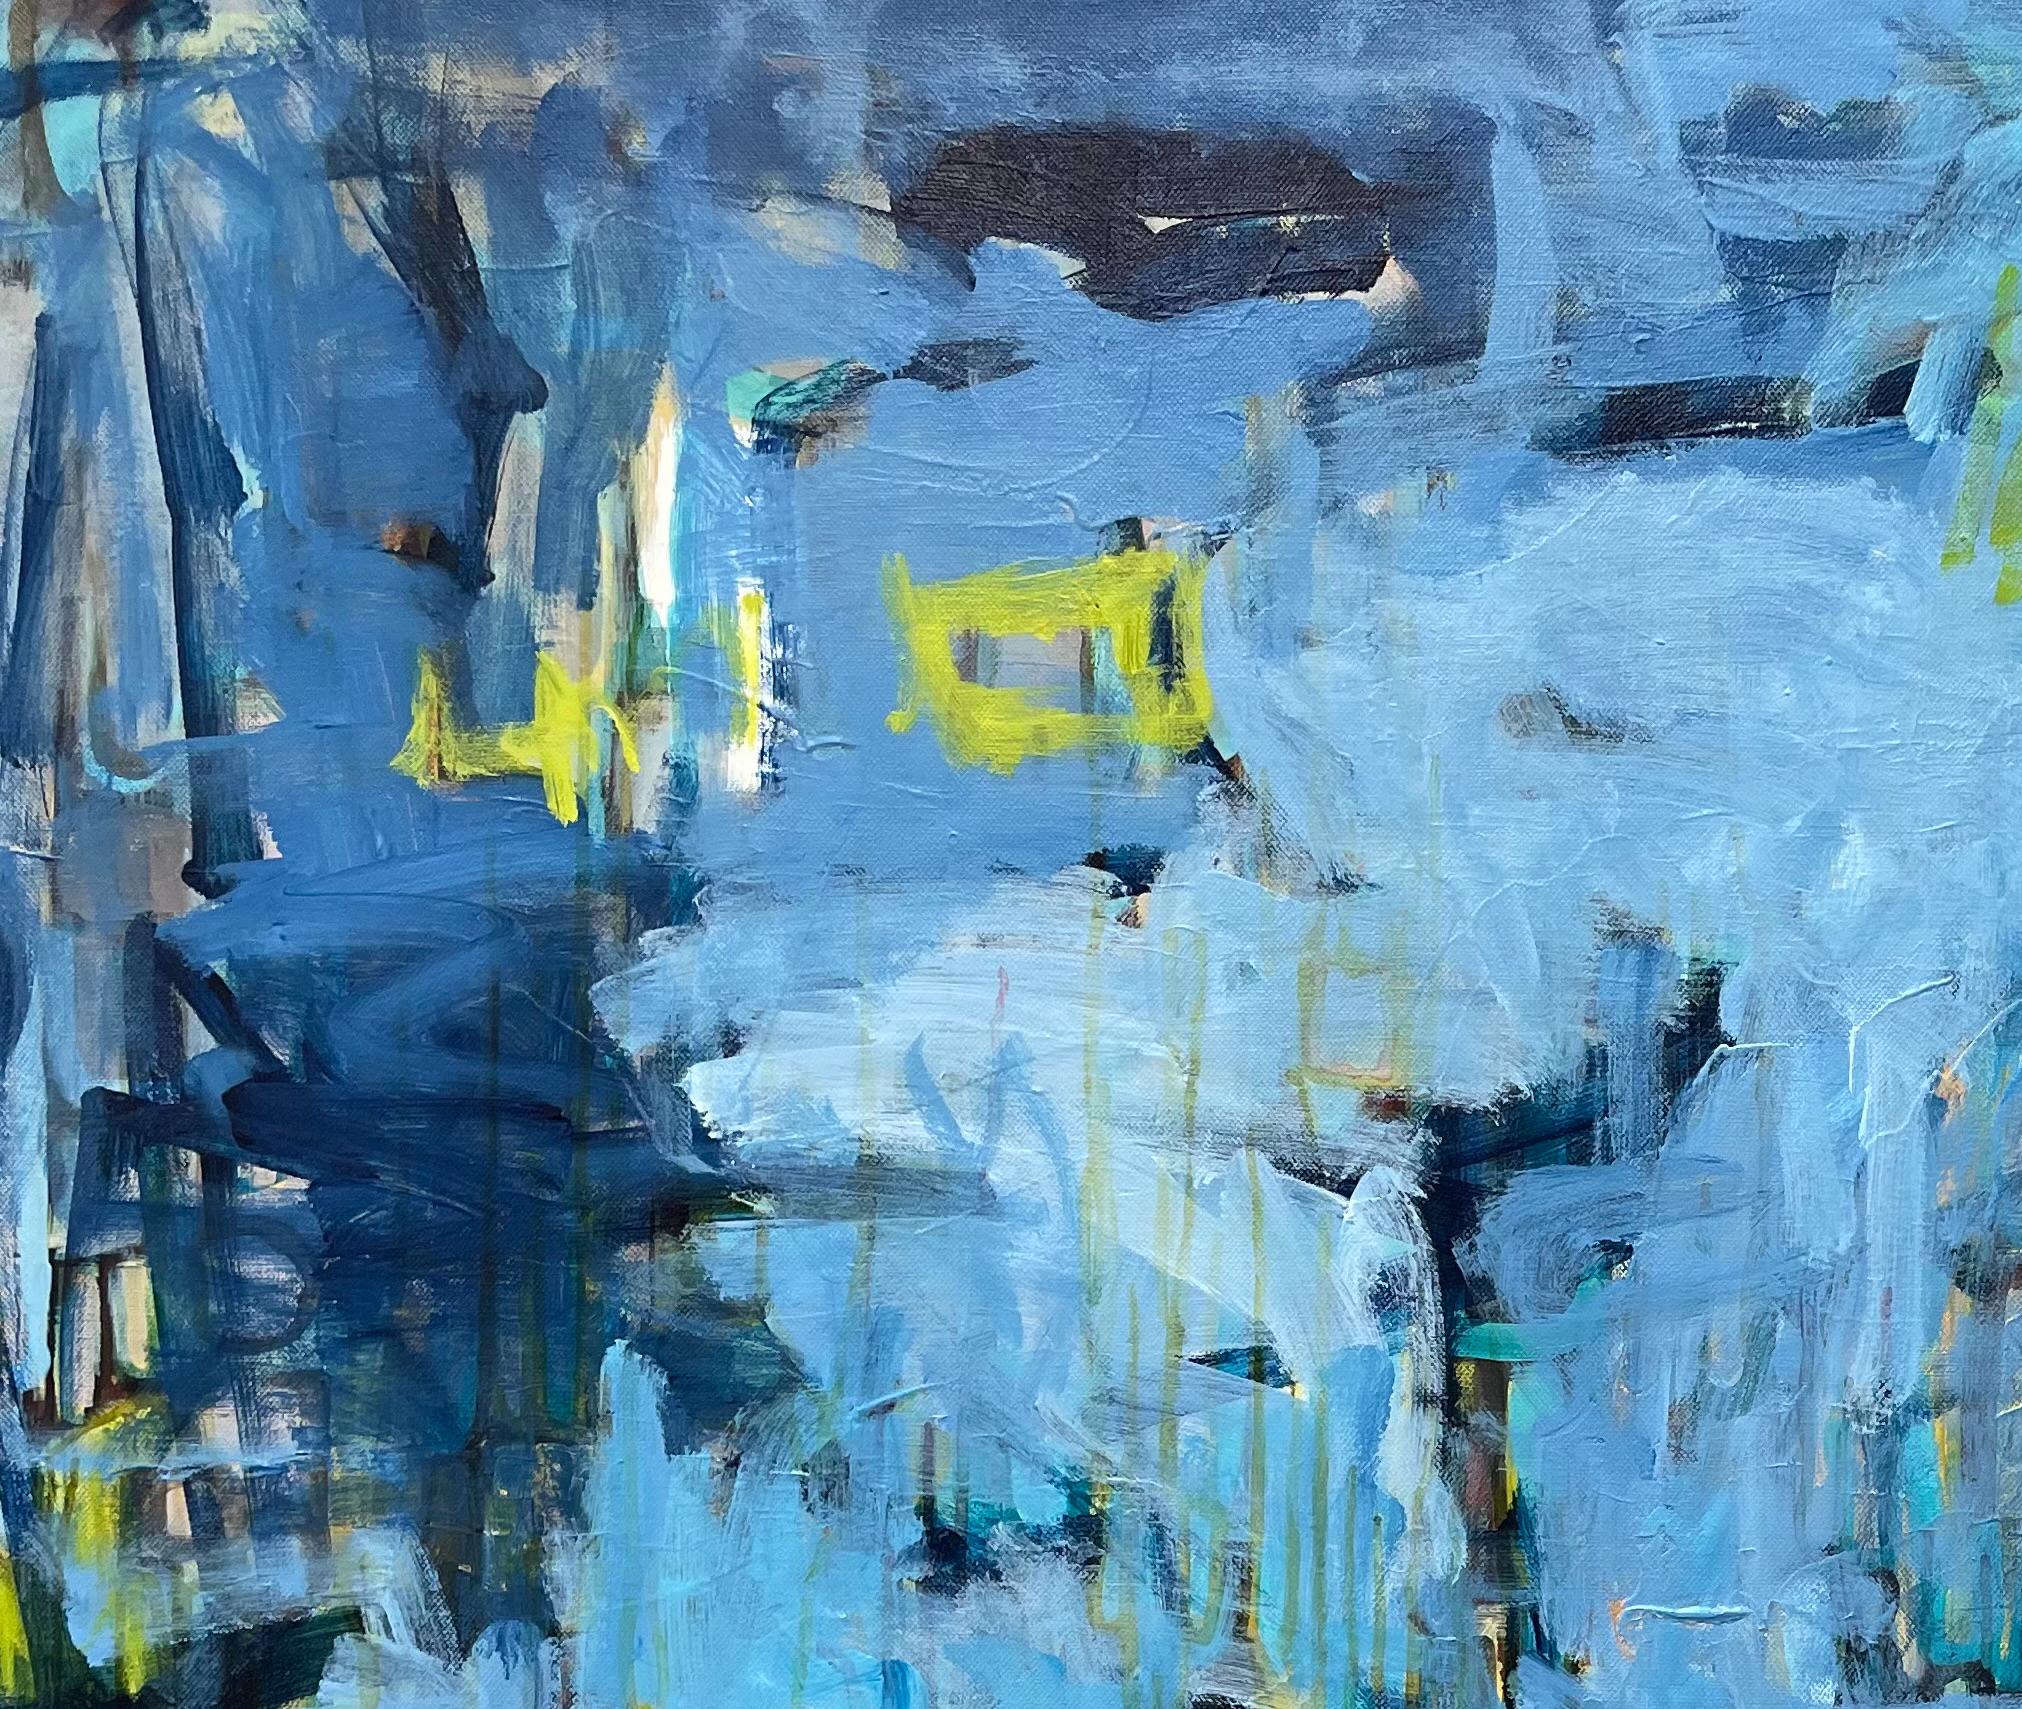 Pond at Dusk is an contemporary abstract  painting by Texan artist Eleanor McCarthy.  It can also be described as a abstract landscape painting. Eleanor McCarthy uses acrylic paints on canvas to create the soothing colors in her new contemporary